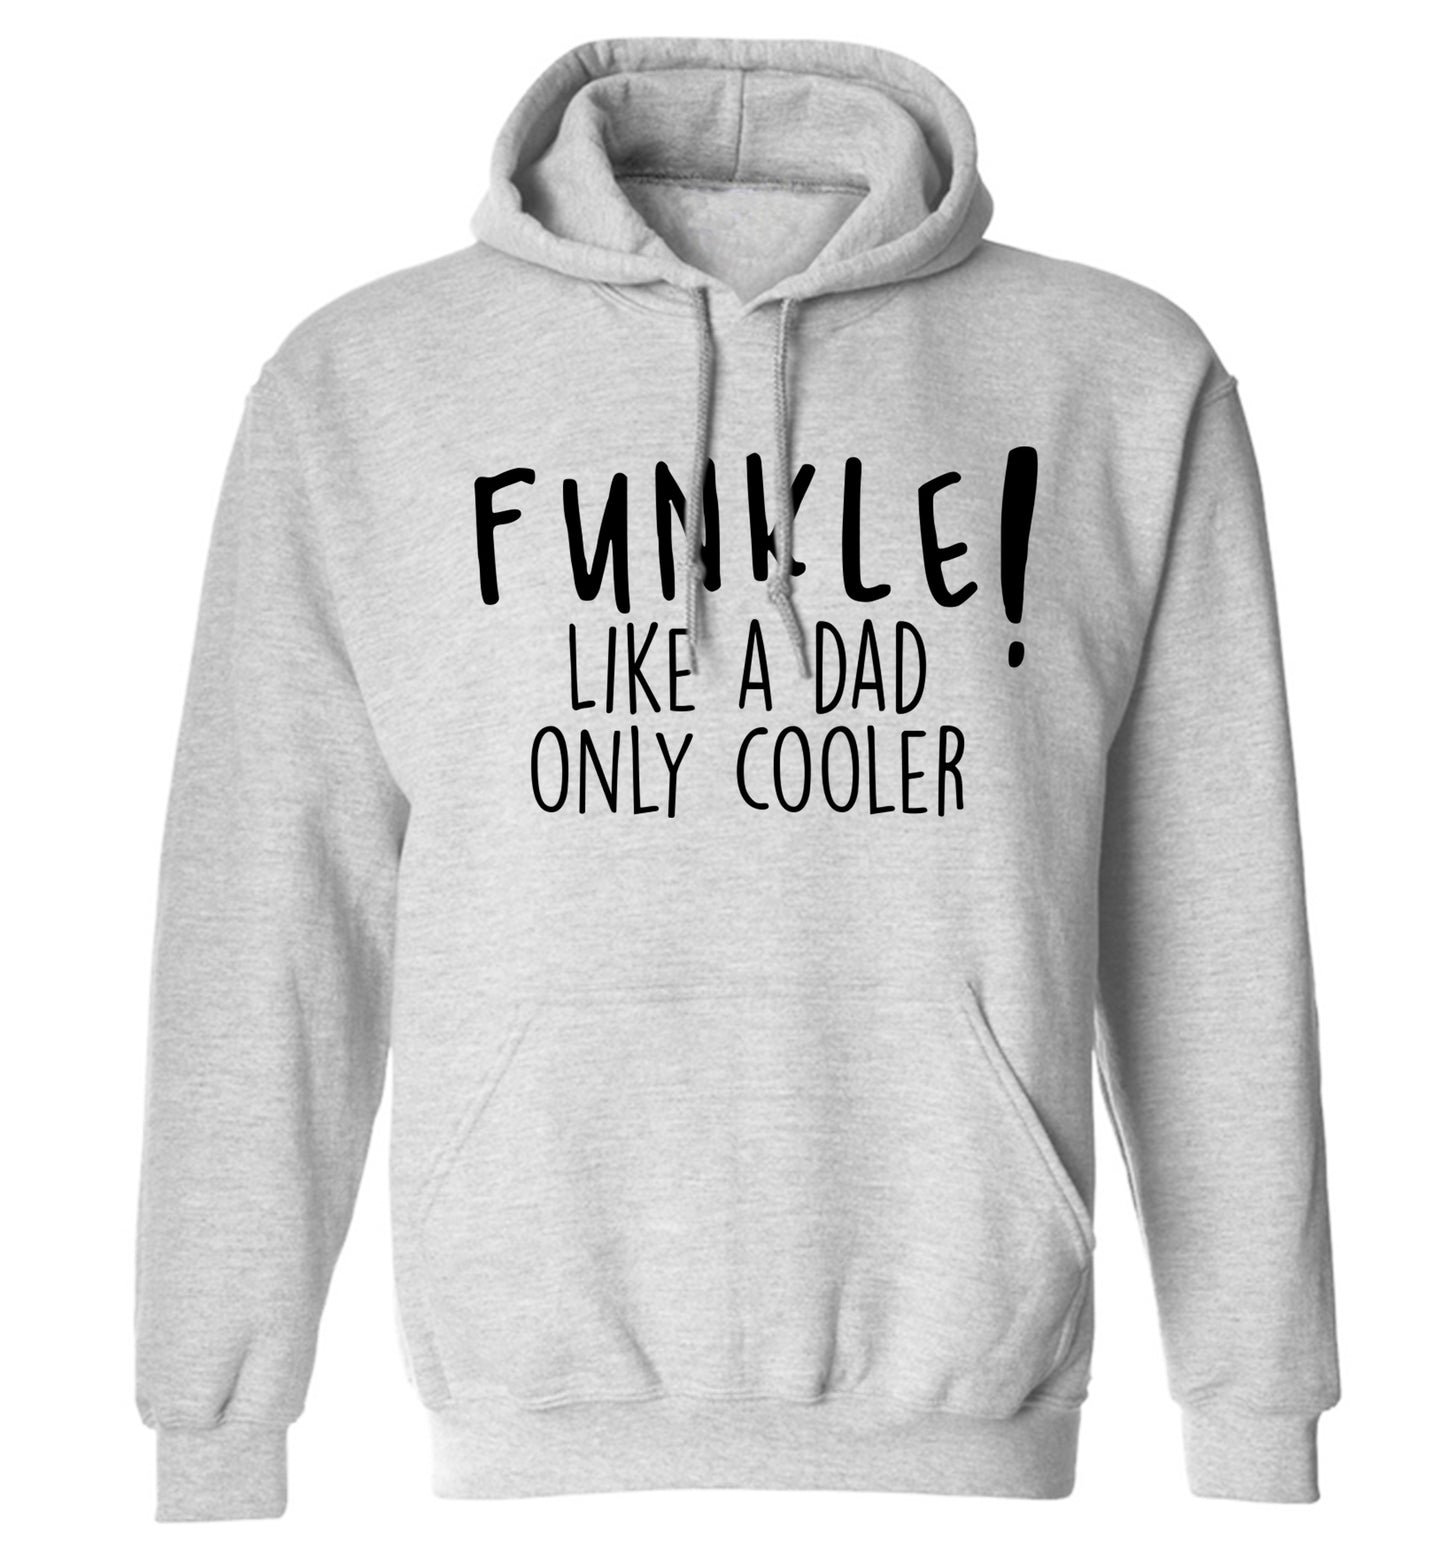 Funkle Like a Dad Only Cooler adults unisex grey hoodie 2XL